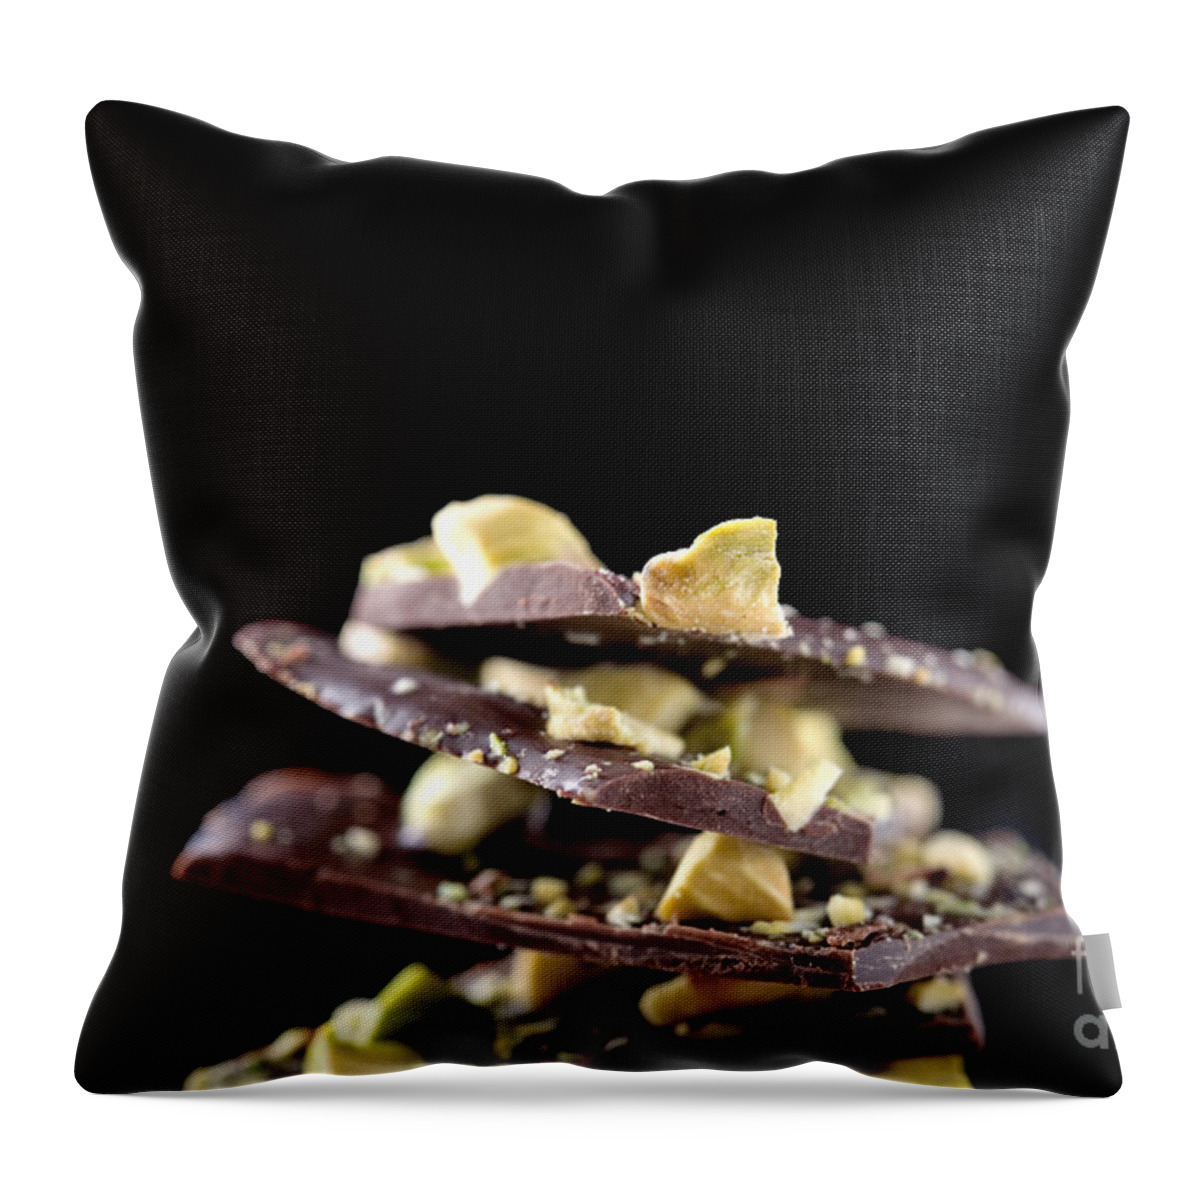 Assortment Throw Pillow featuring the photograph Chocolate with pistacios by Kati Finell